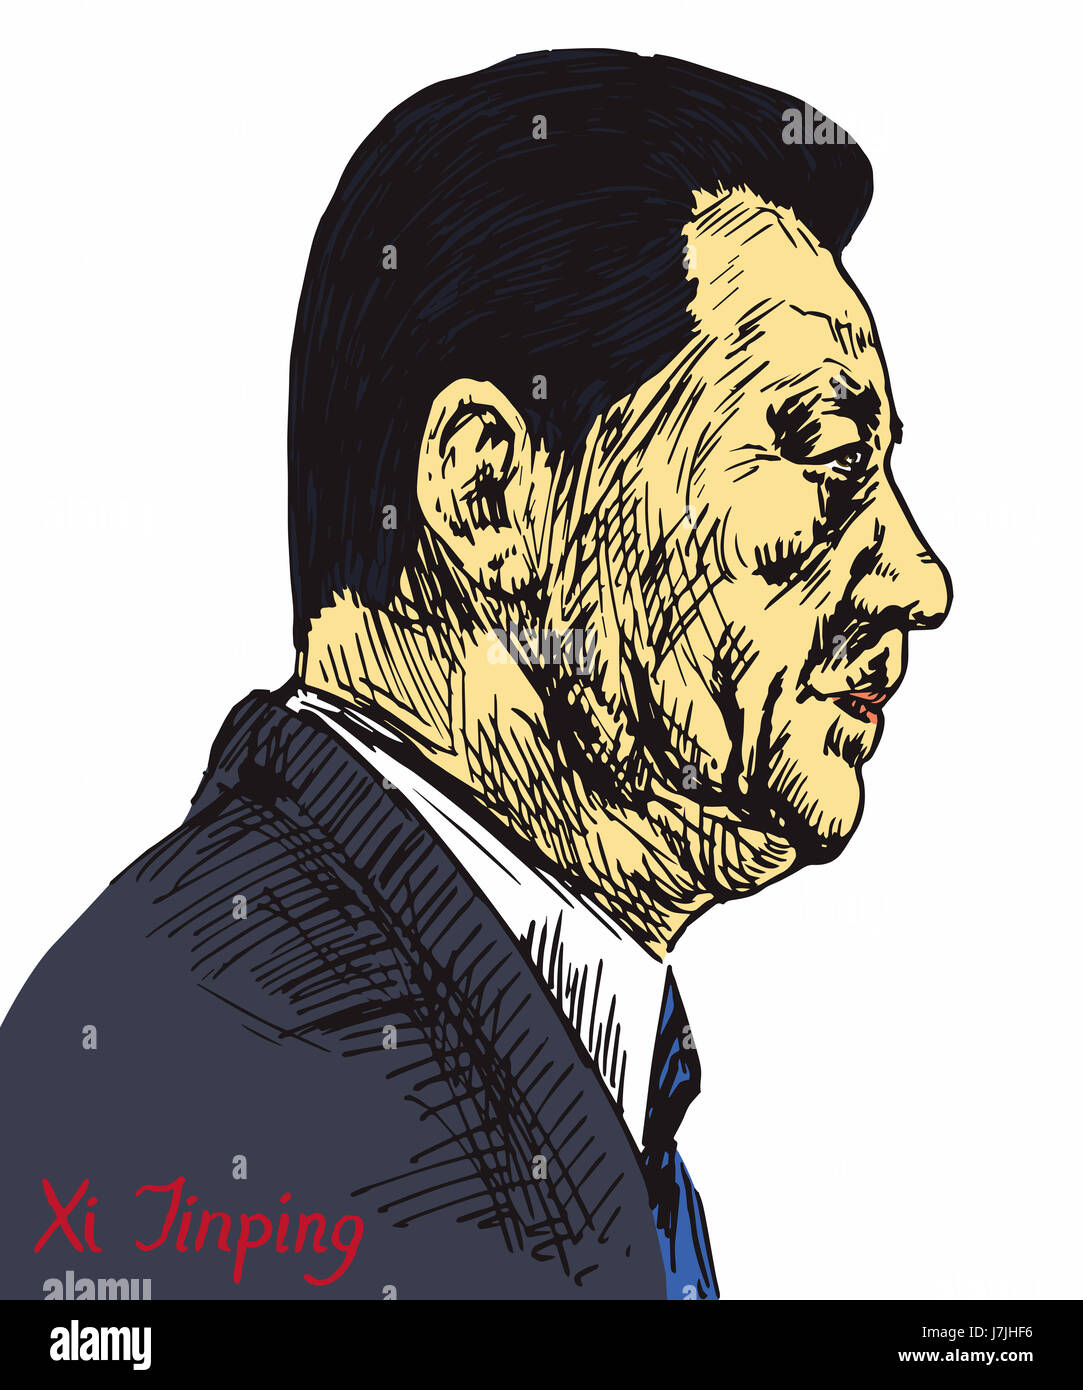 Xi Jinping, General Secretary of the Communist Party of China, President of the People's Republic of China, drawn by hand illustration Stock Photo